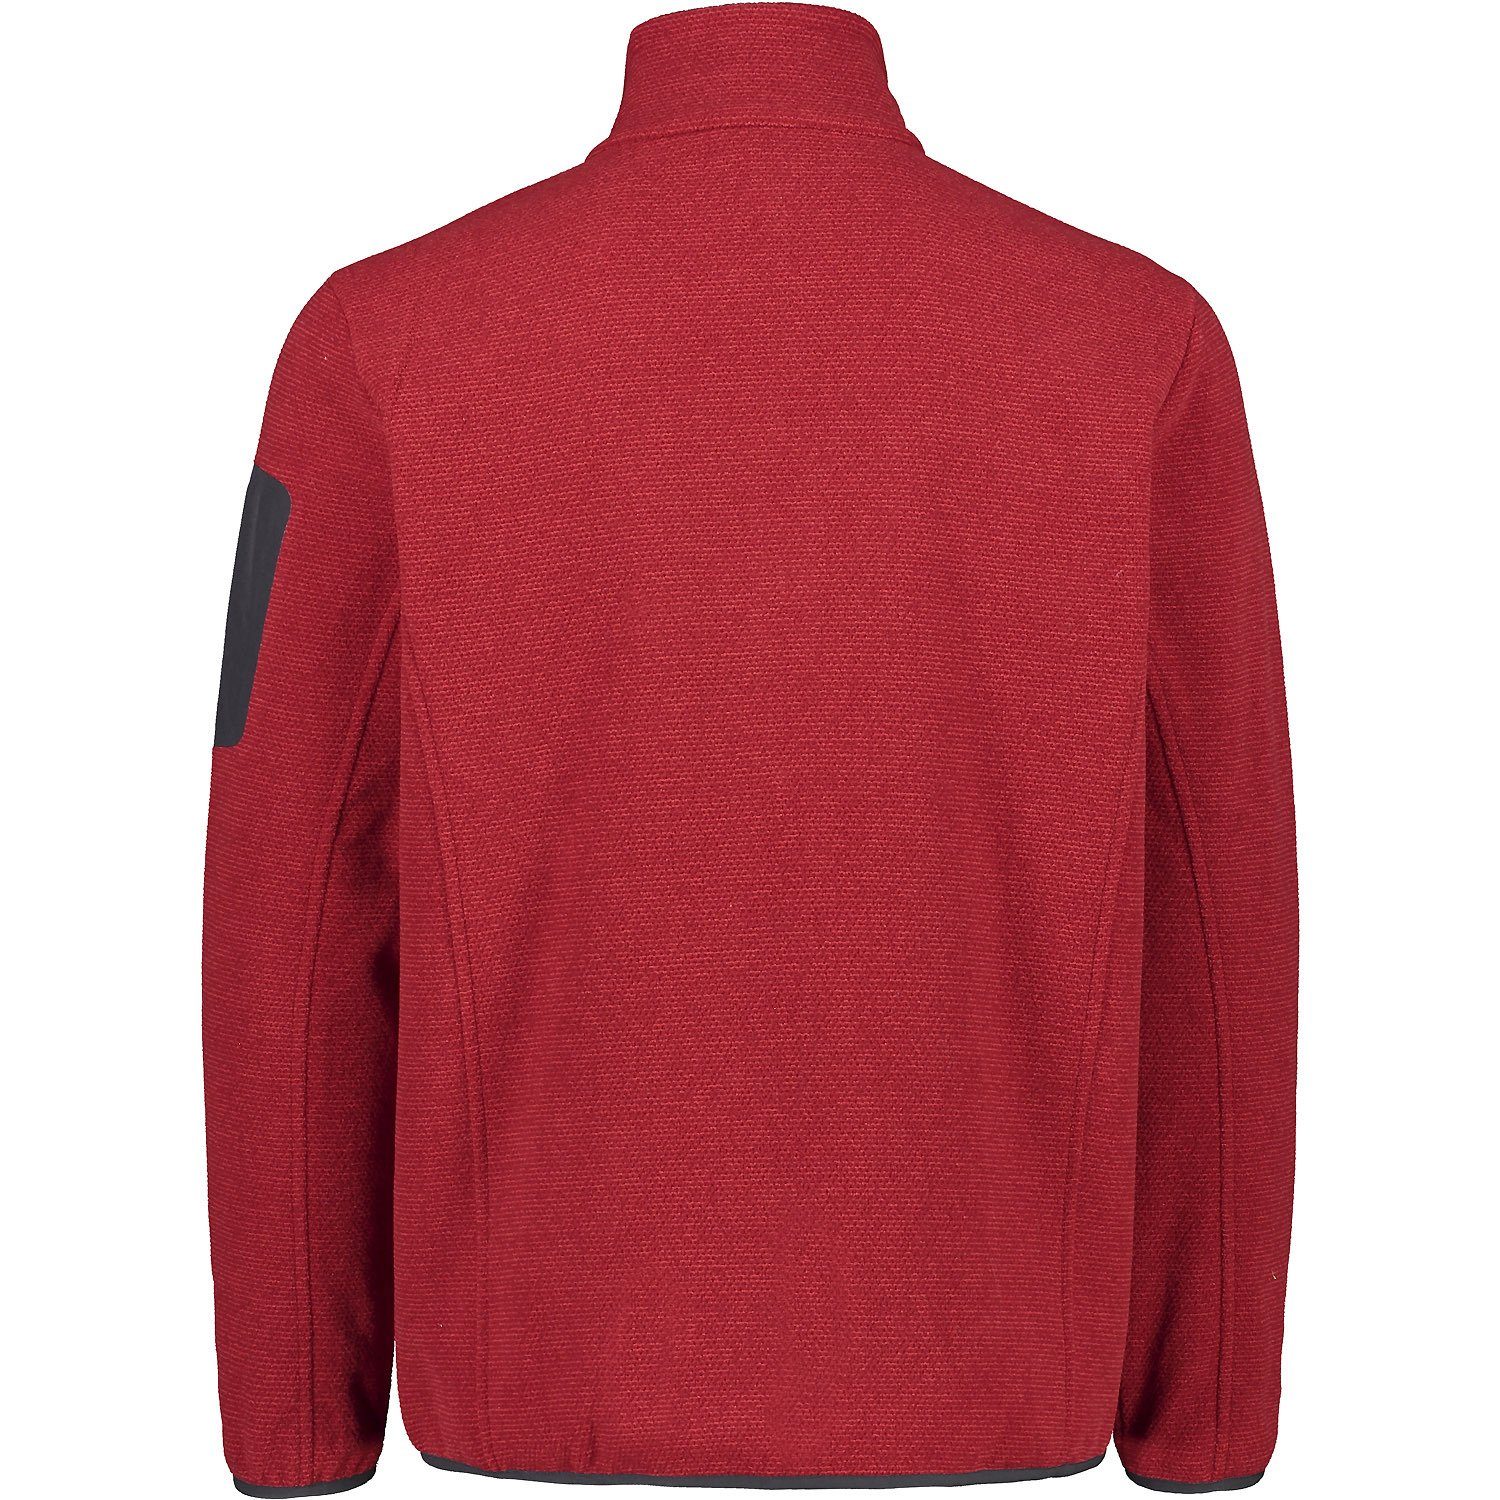 Knitted CAMPAGNOLO Jacquard Red Fire Cardigan Strickjacke (1-tlg) Jacket